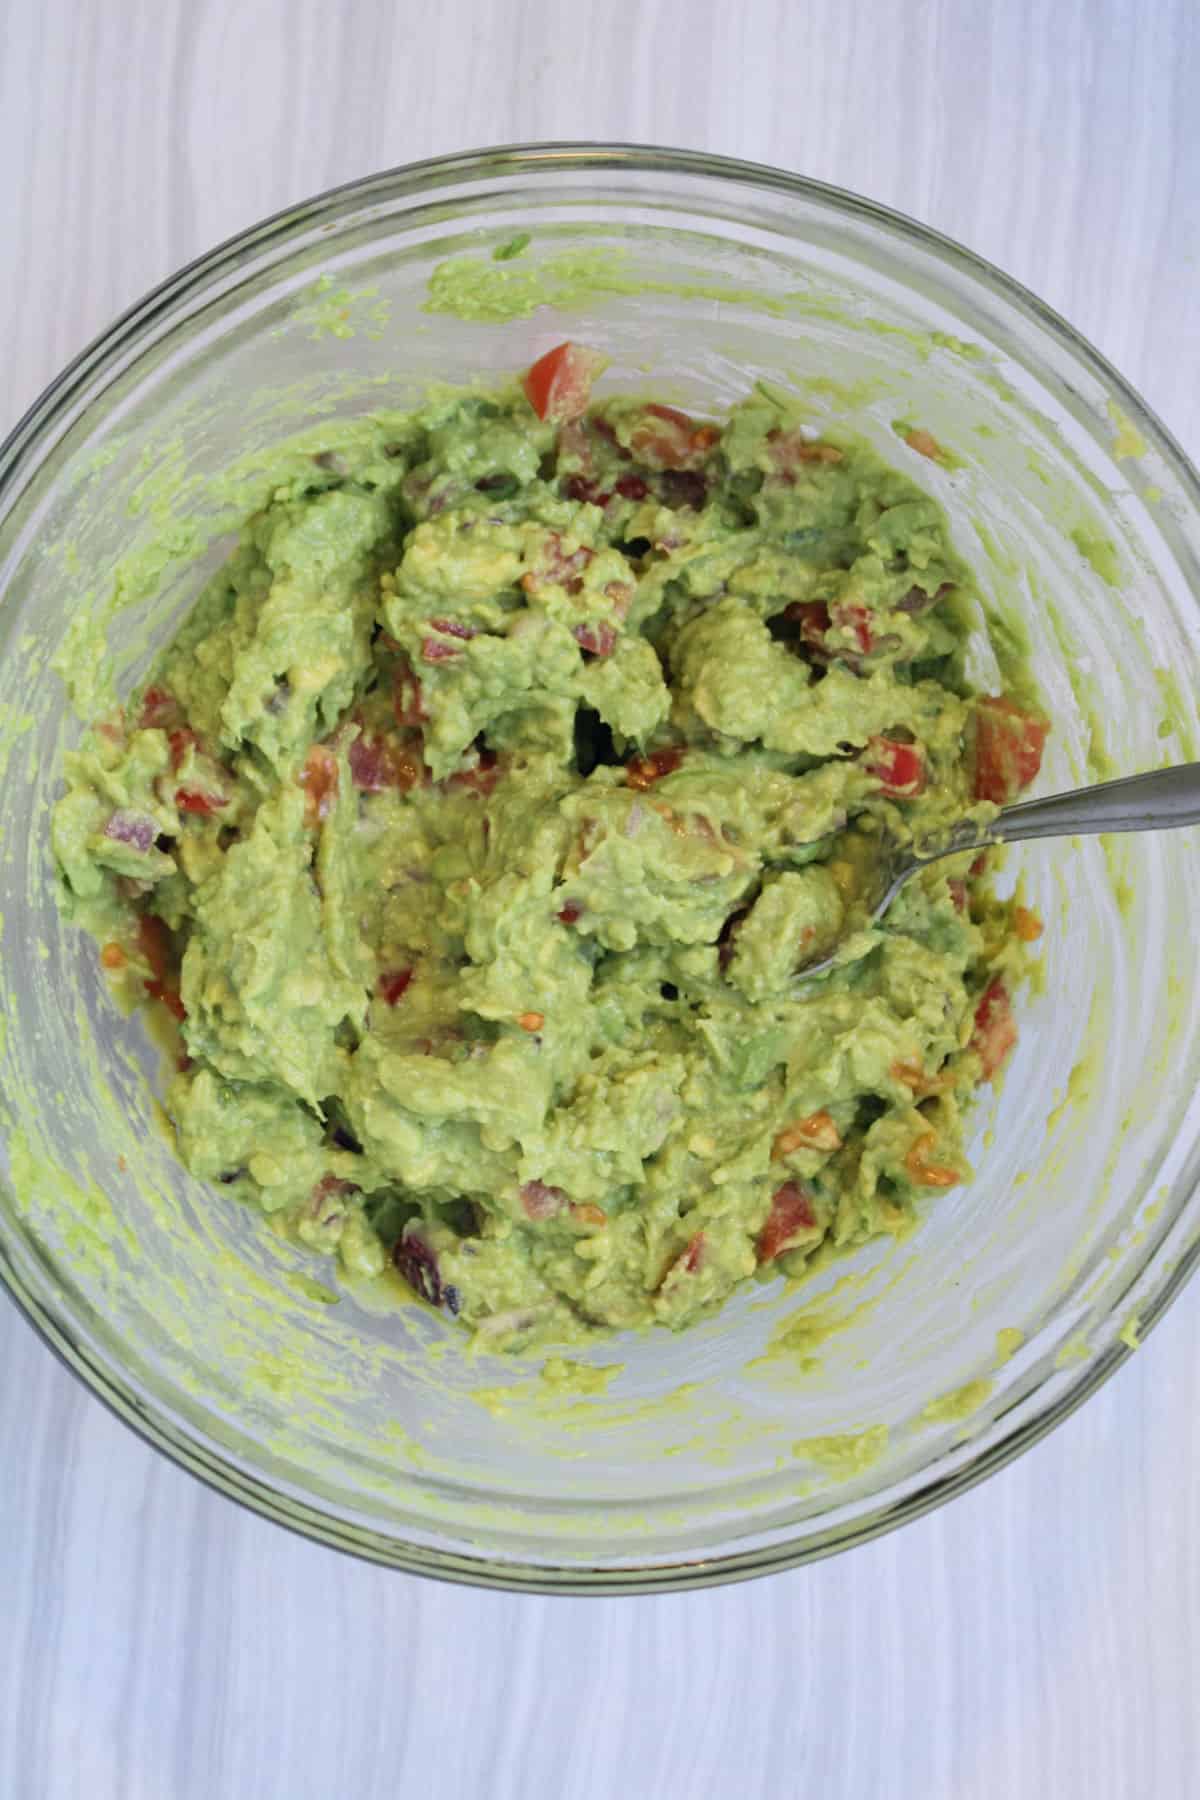 mashed avocados, onions, tomatoes, and cilantro.